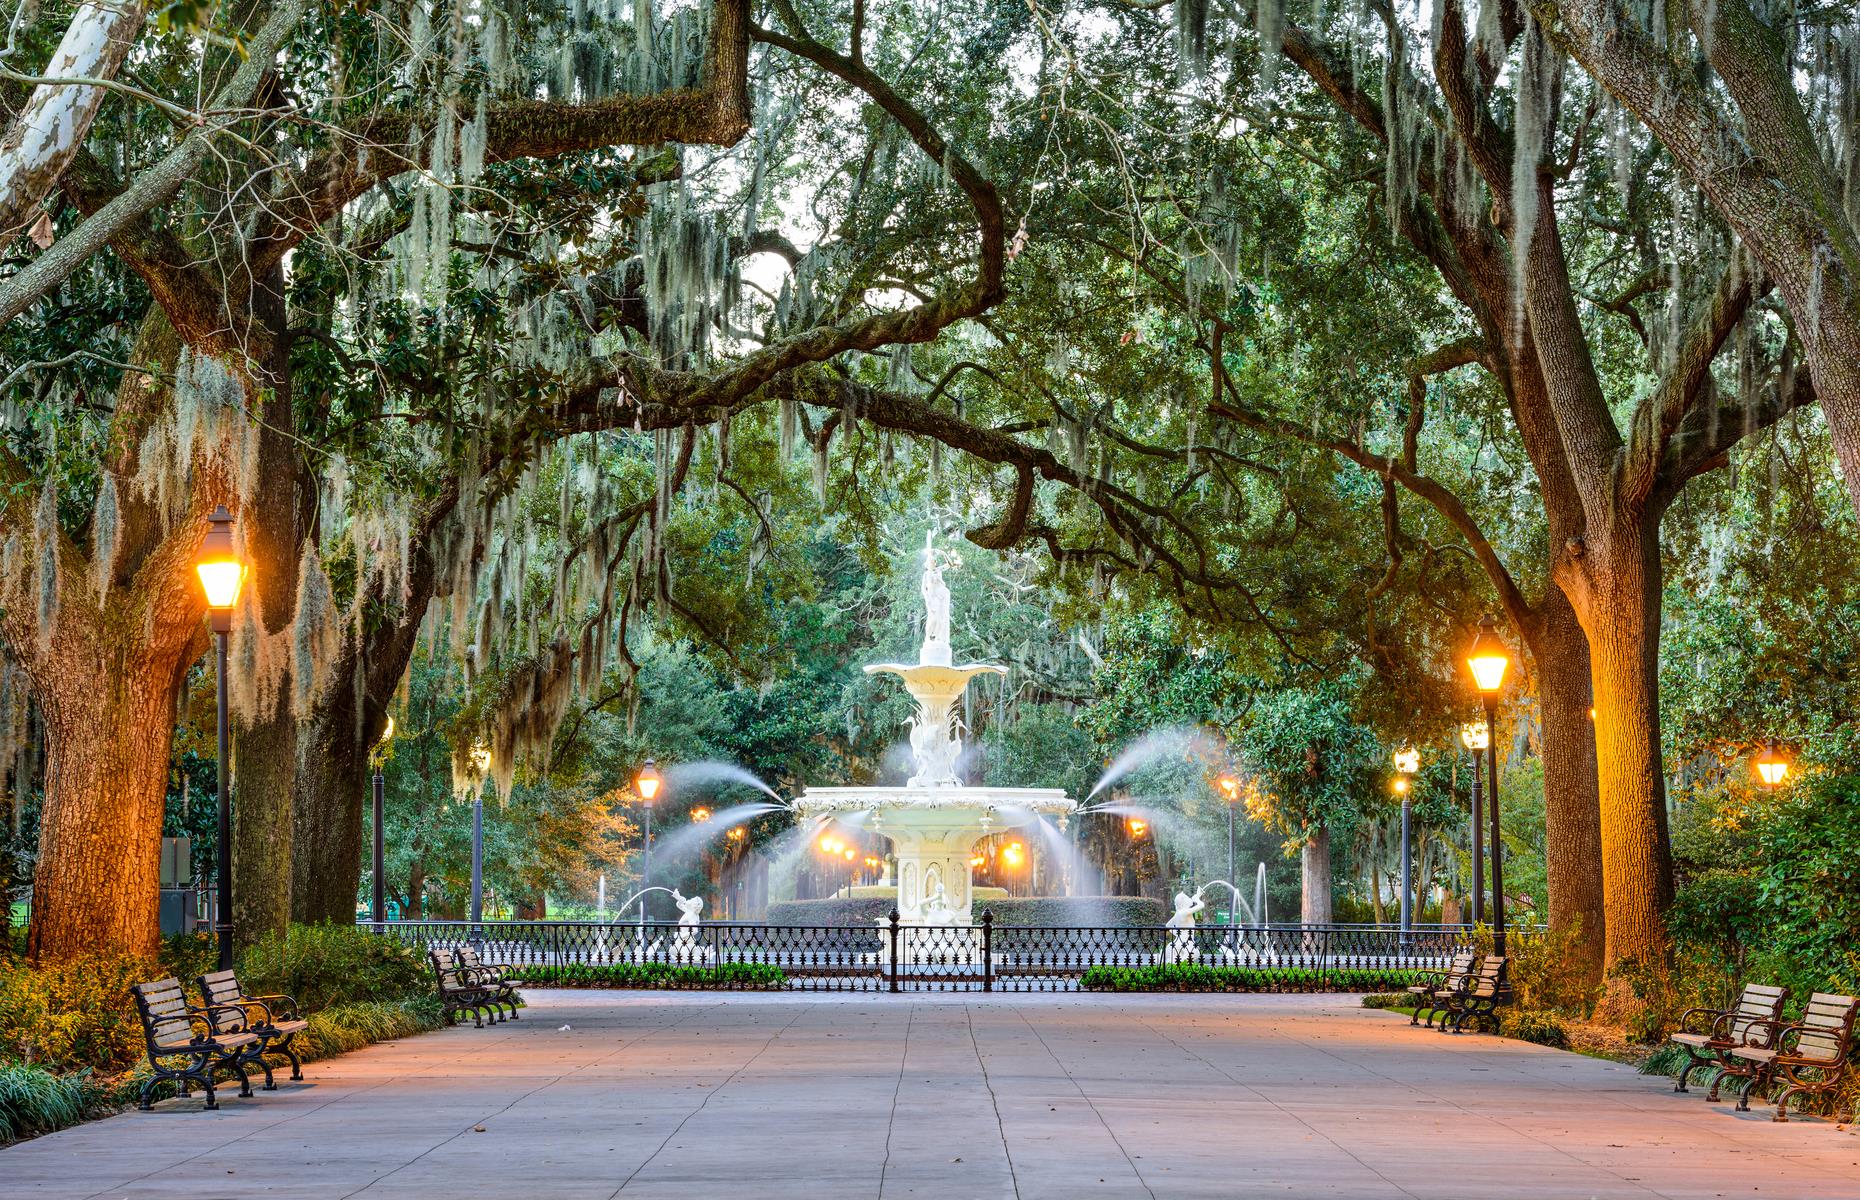 <p>Nothing screams Georgia more than twisting oaks dripping in Spanish moss and <a href="https://www.savannah.com/forsyth-park-3/">this stunning park</a> certainly delivers on that front. Wander Forsyth Park's 30-plus acres, pausing to admire the ornate fountain which dates to the 19th century. Or time your visit for the Saturday farmers' market or the autumn jazz festival. Once you've soaked up the park, strike out into the streets of the Historic District where you'll find house museums, churches and 22 oak-cloaked squares.</p>